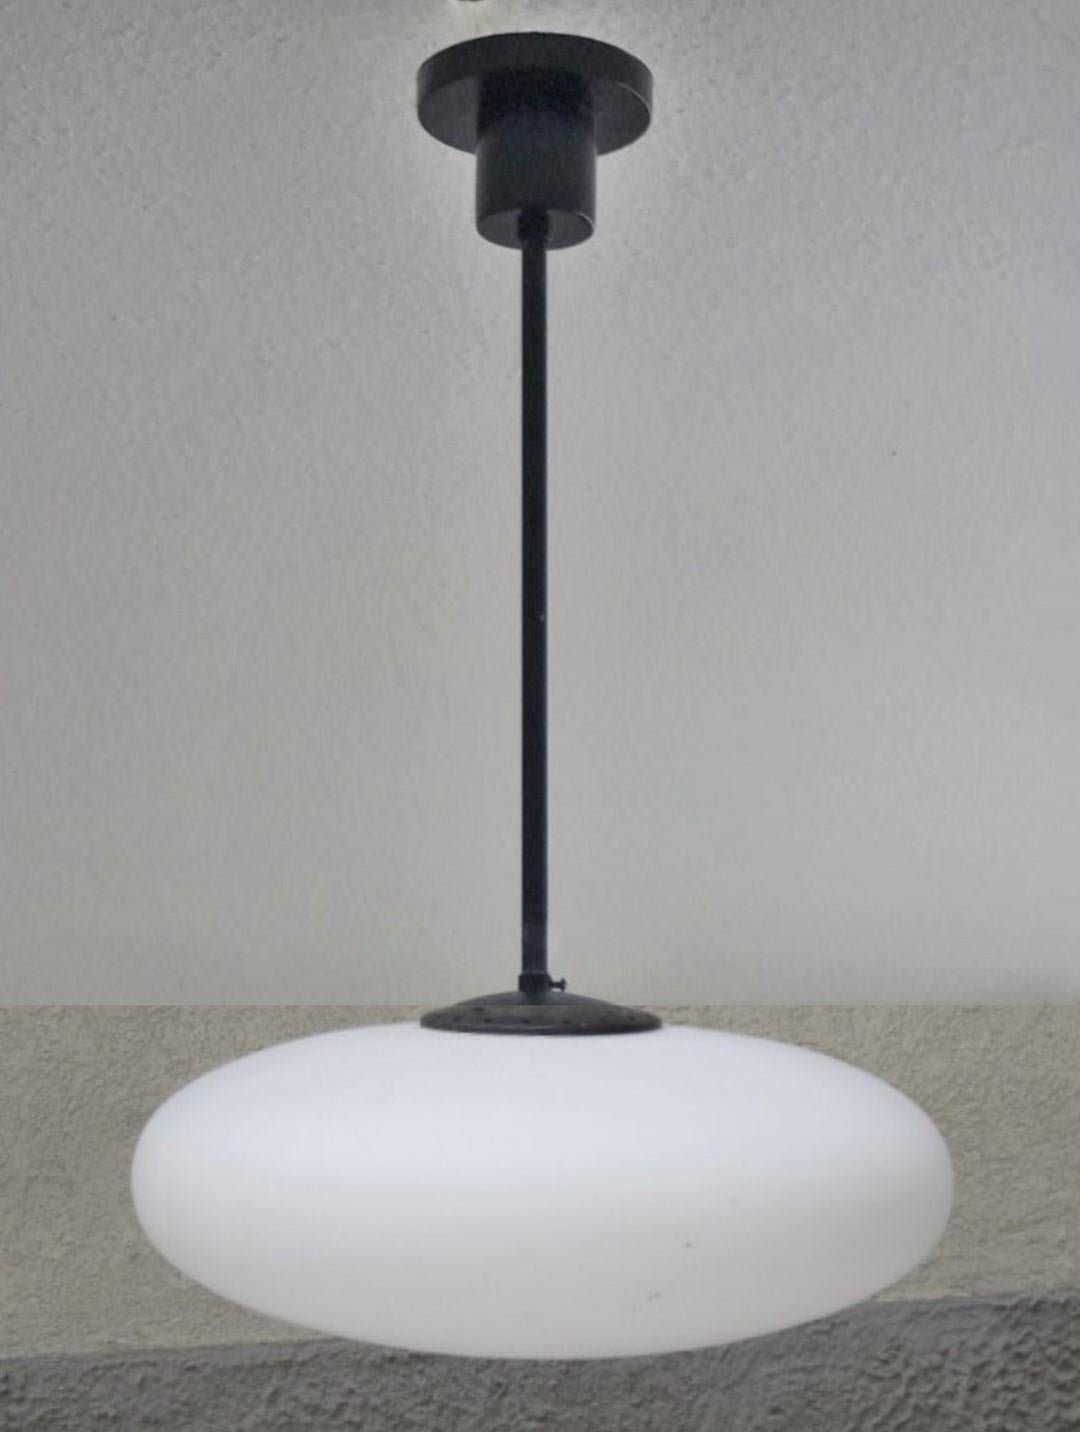 Pendant by Arredoluce manufactured in Italy, 1950s. With large brushed satin glass diffuser, black painted steel mounts. It takes one E27 100watt bulb. Rewired and ready to hang.
Measures: Diameter 20